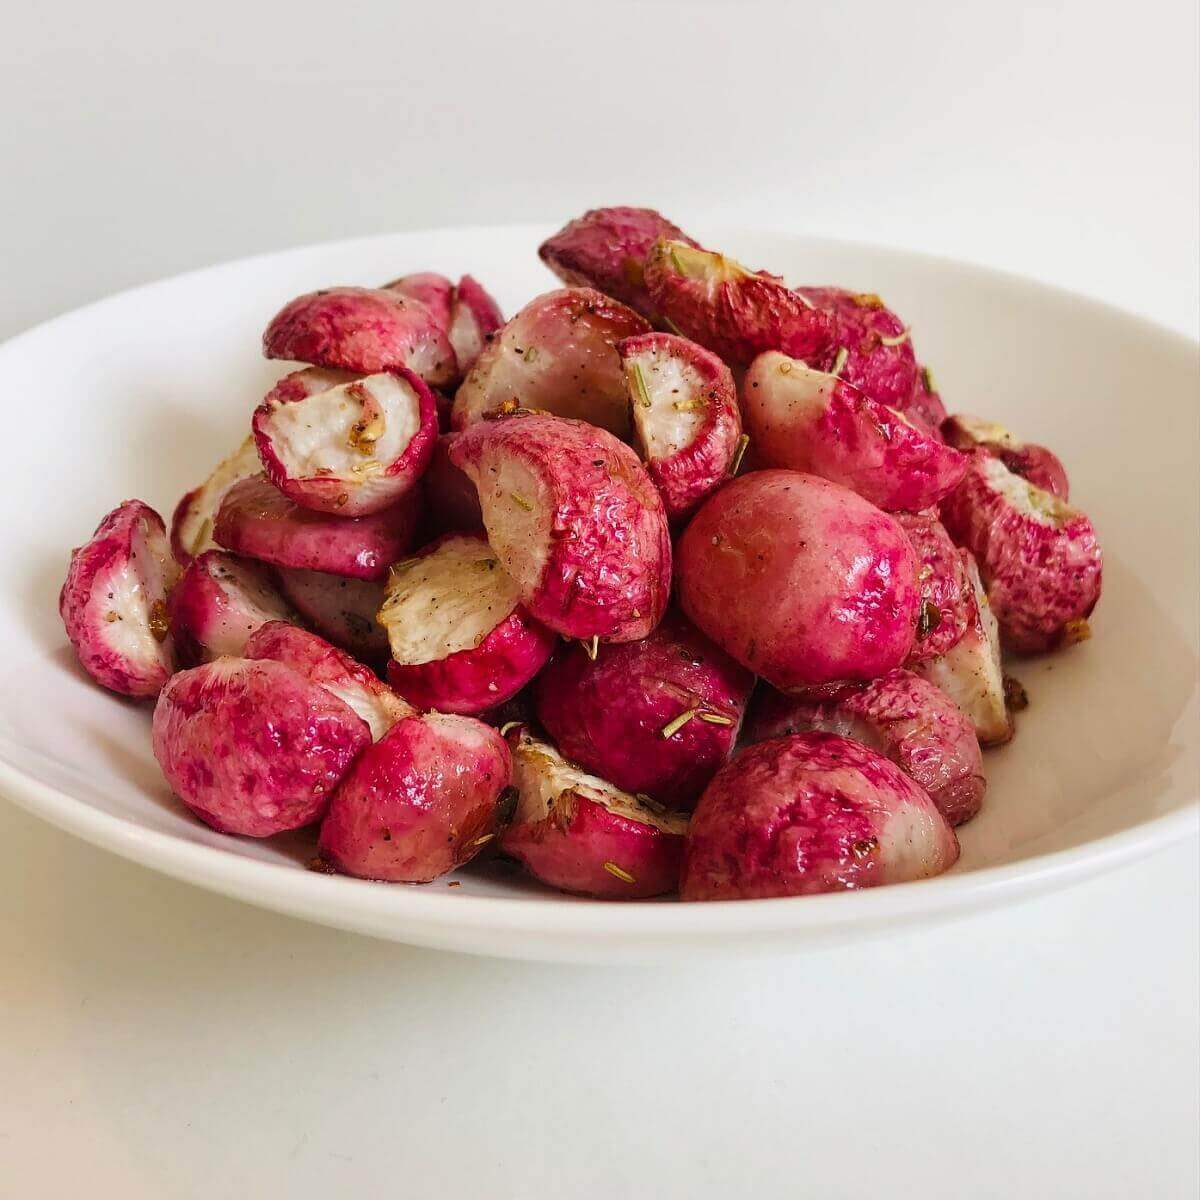 Baked radishes in a white bowl.